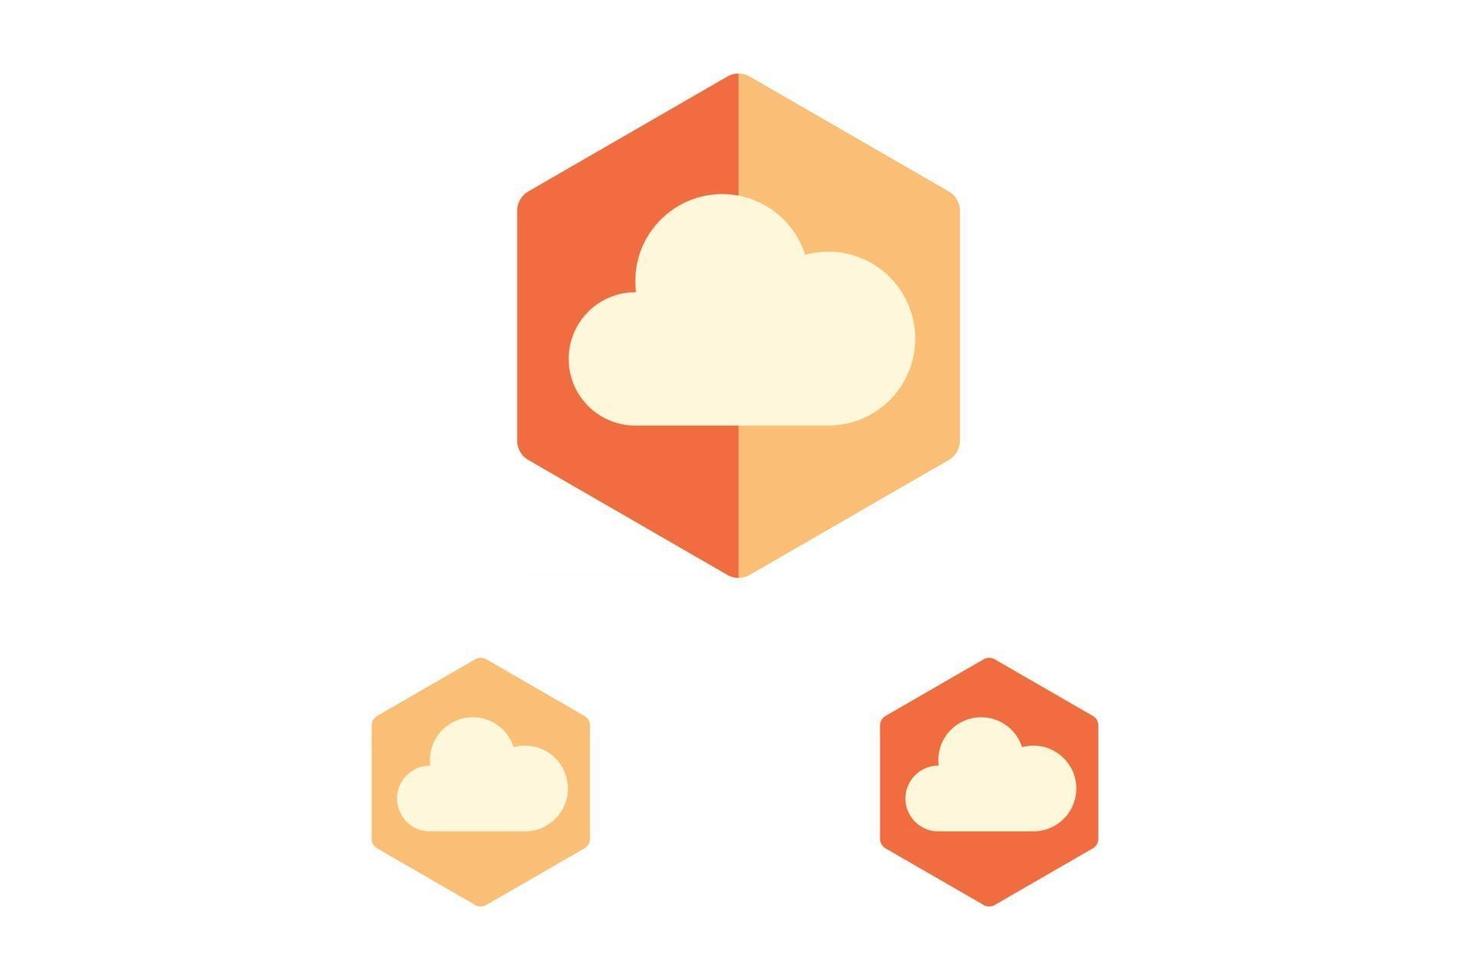 cloud database vector icon in flat design style